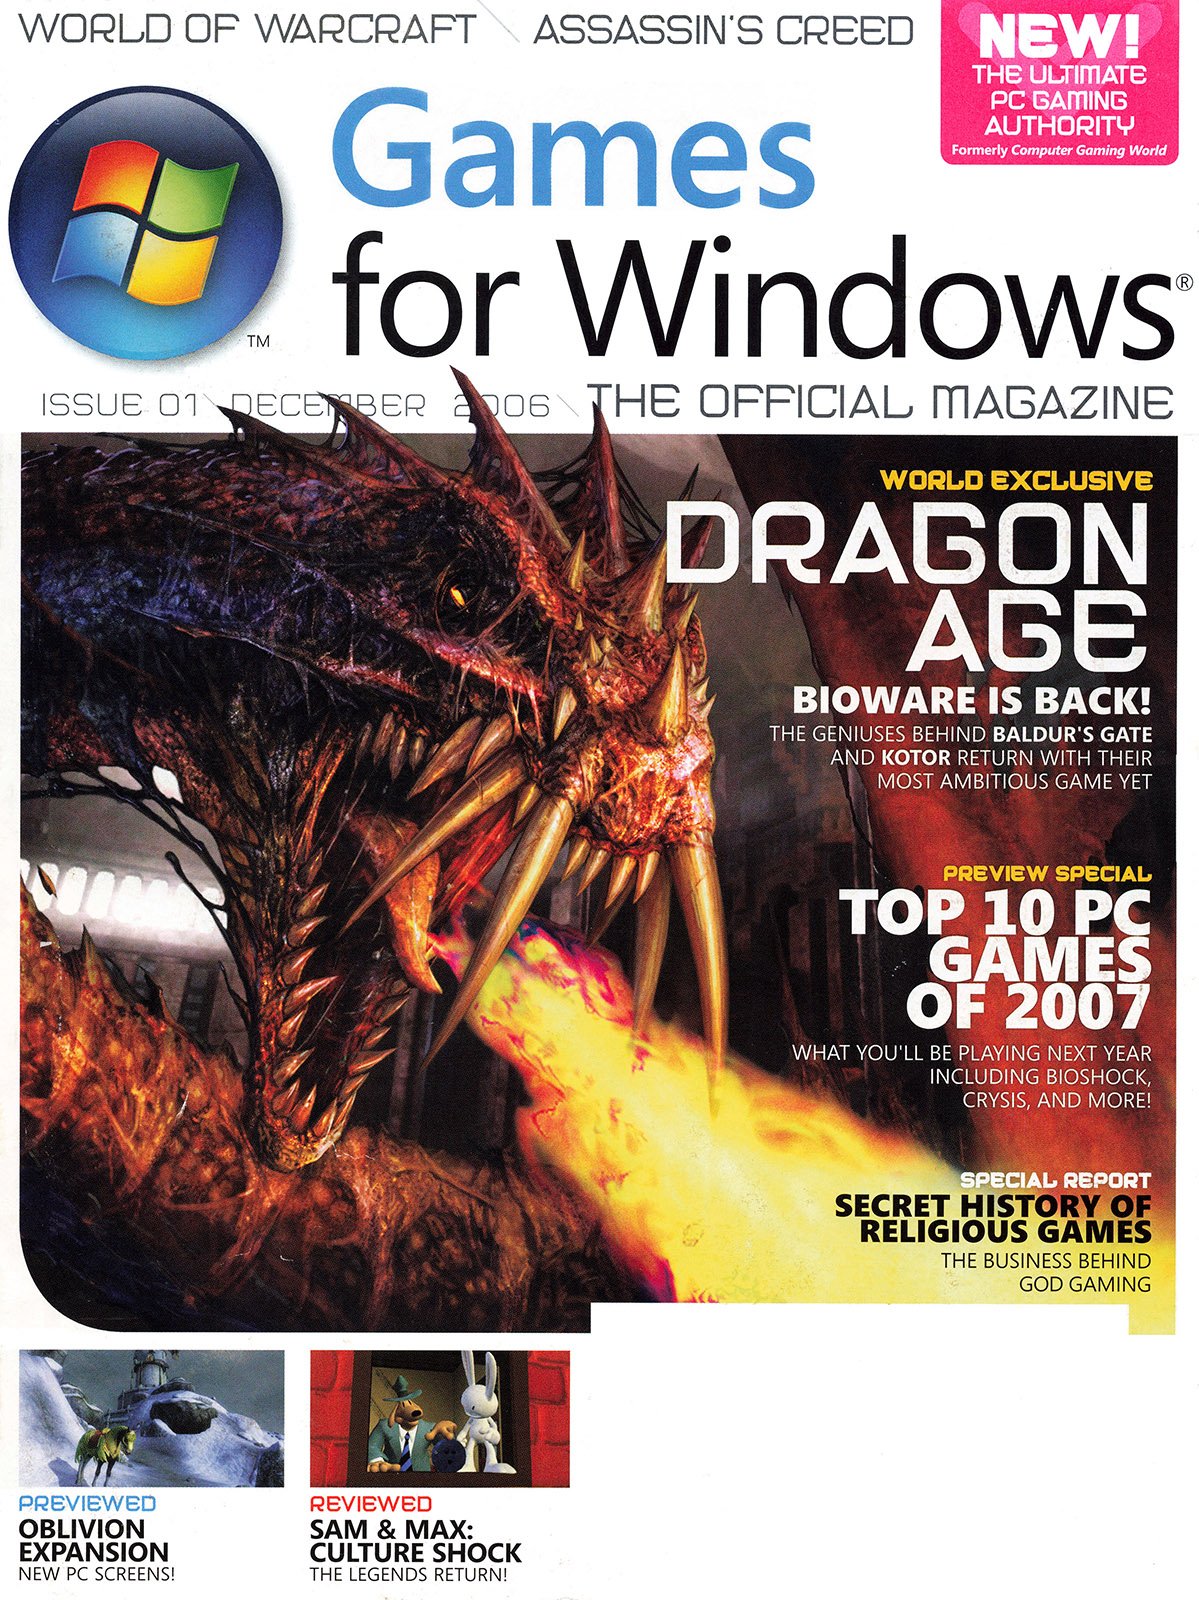 Games for Windows Issue 01 (December 2006)